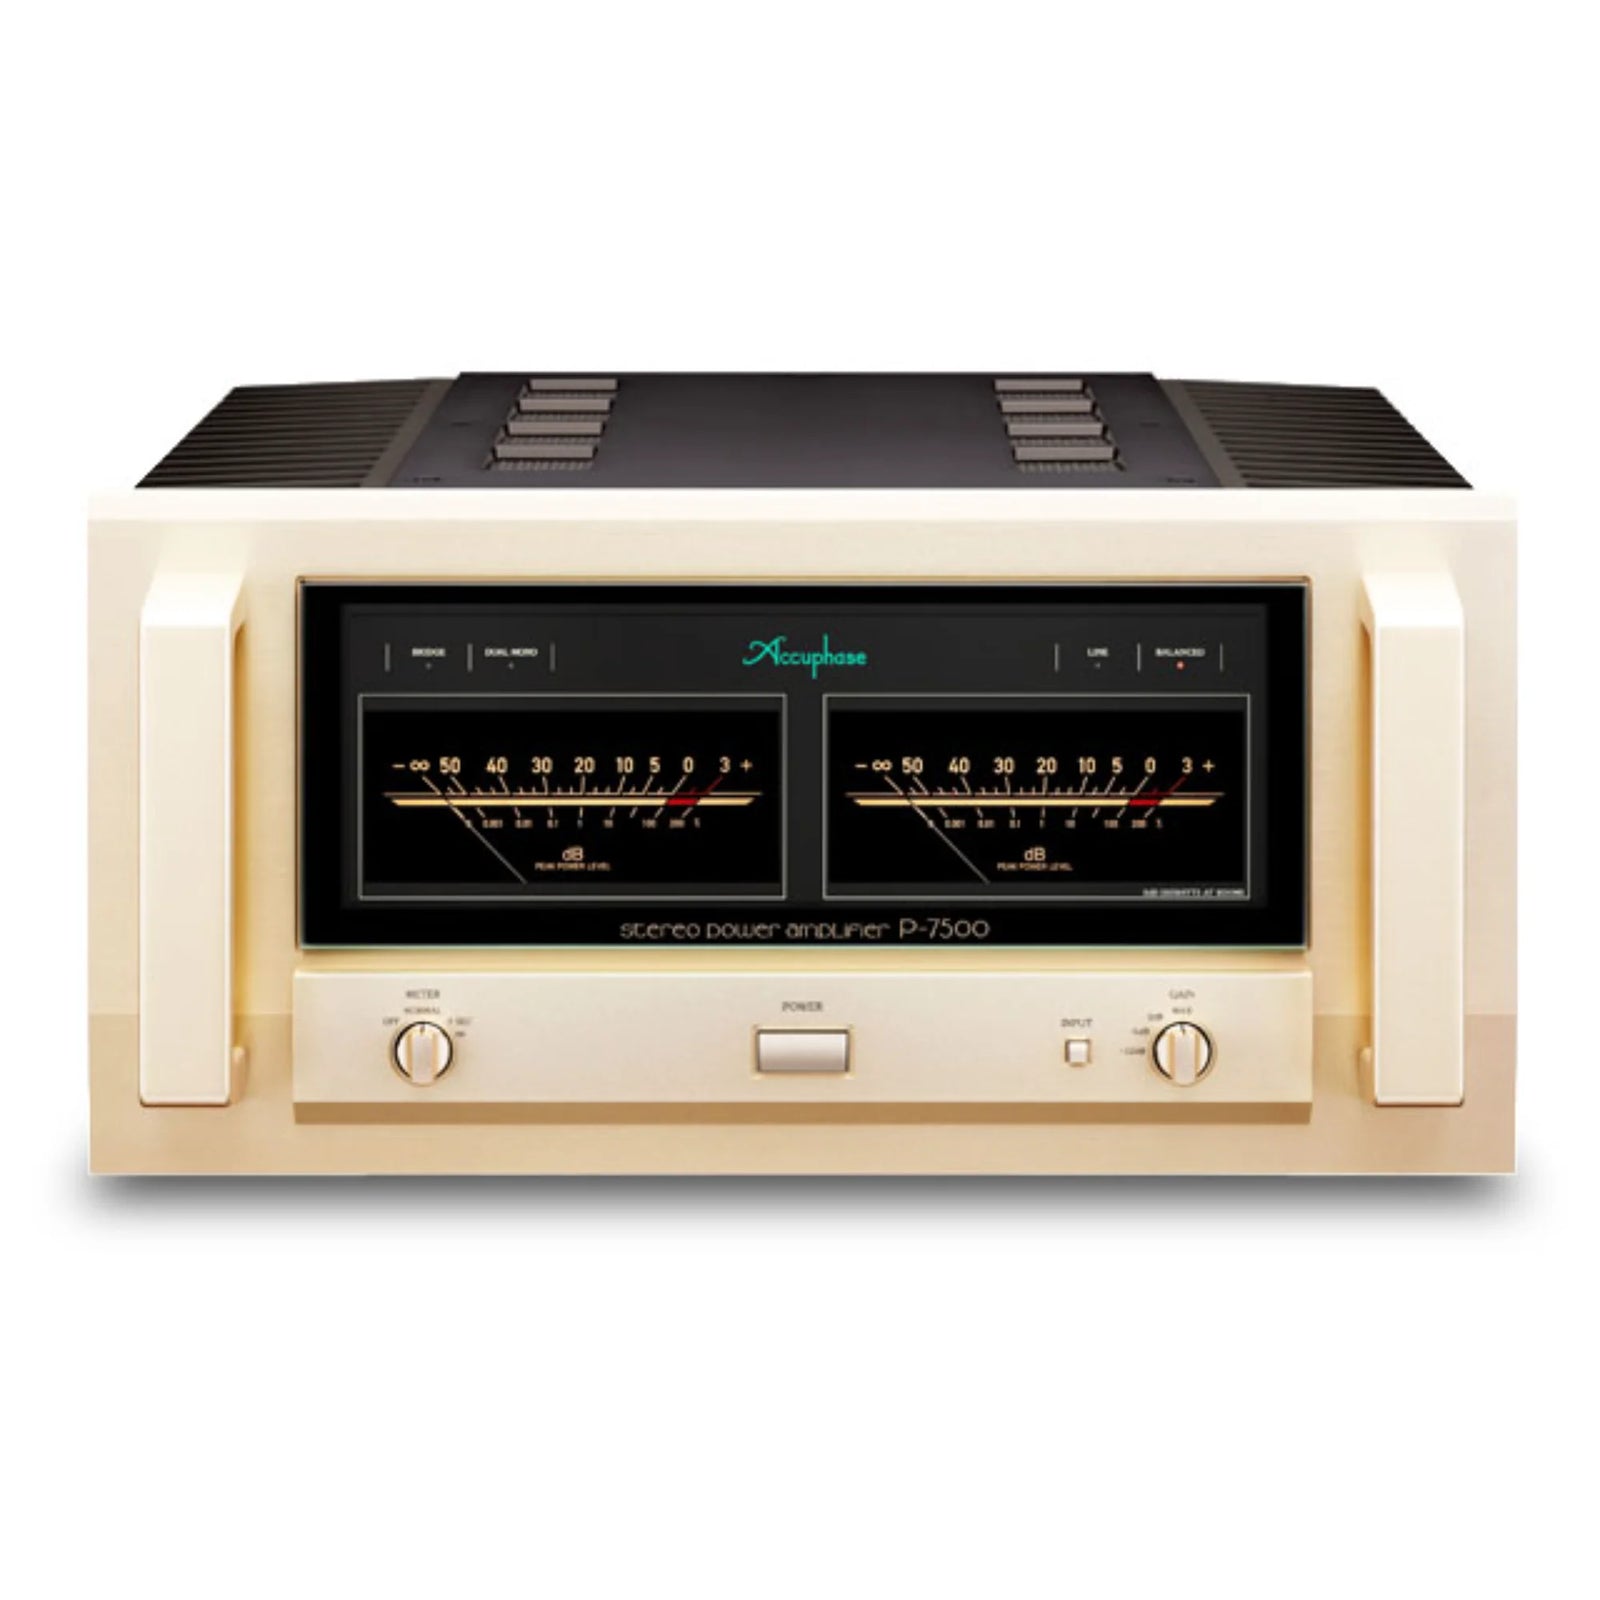 Accuphase P-7500 Power Amplifier Product & Specification The P-7500 is our flagship model Class AB stereo power amplifier that provides supreme driving performance. The power amplification stage uses a 10-parallel push-pull power transistor architecture, providing a rated output power of 300 W / 8 ohms that vastly exceeds that of conventional models.